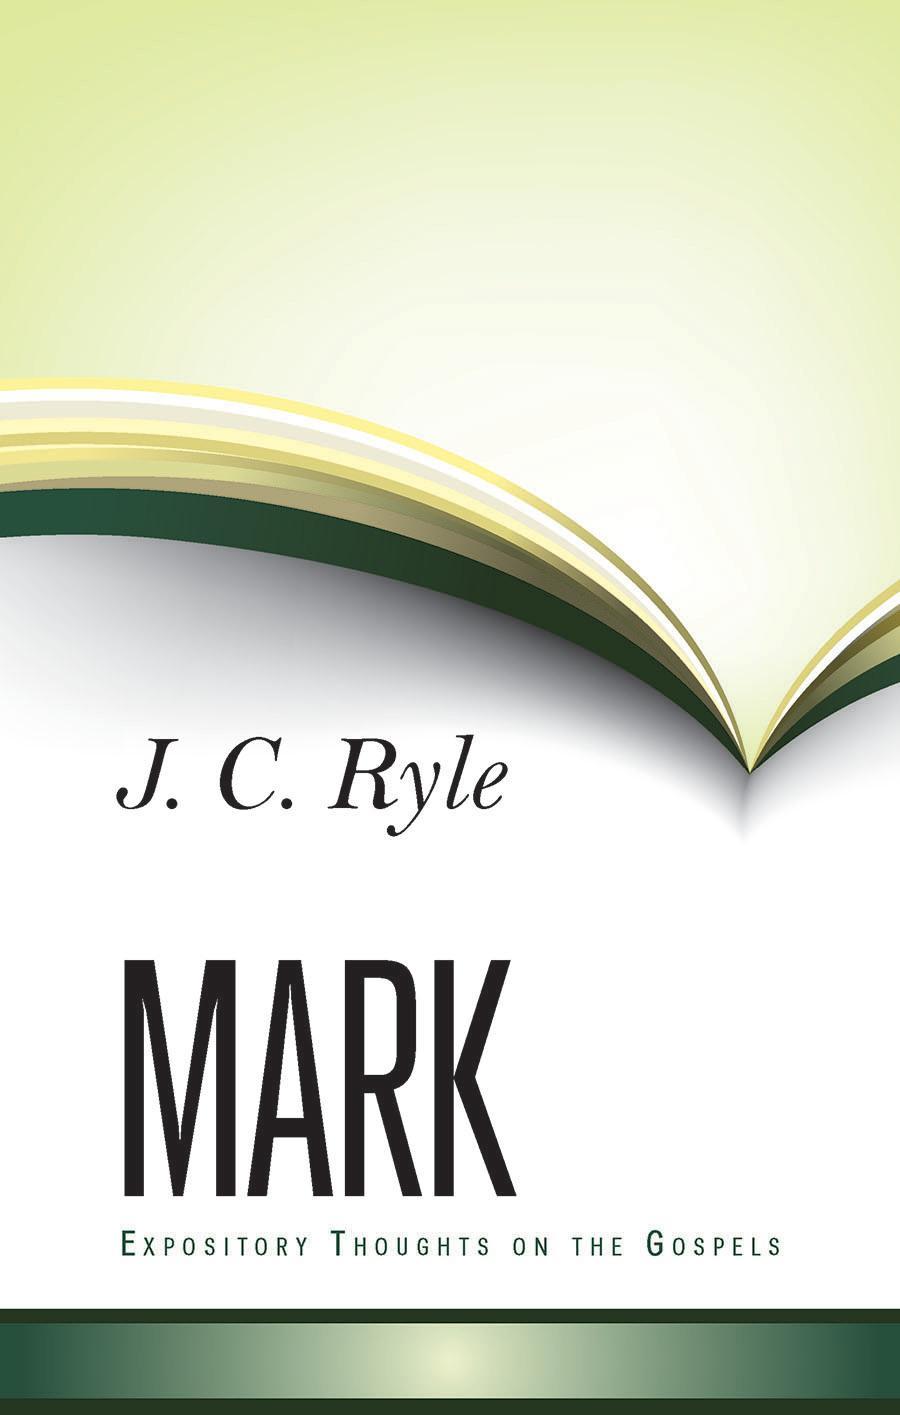 Mark Expository Thoughts on the Gospels